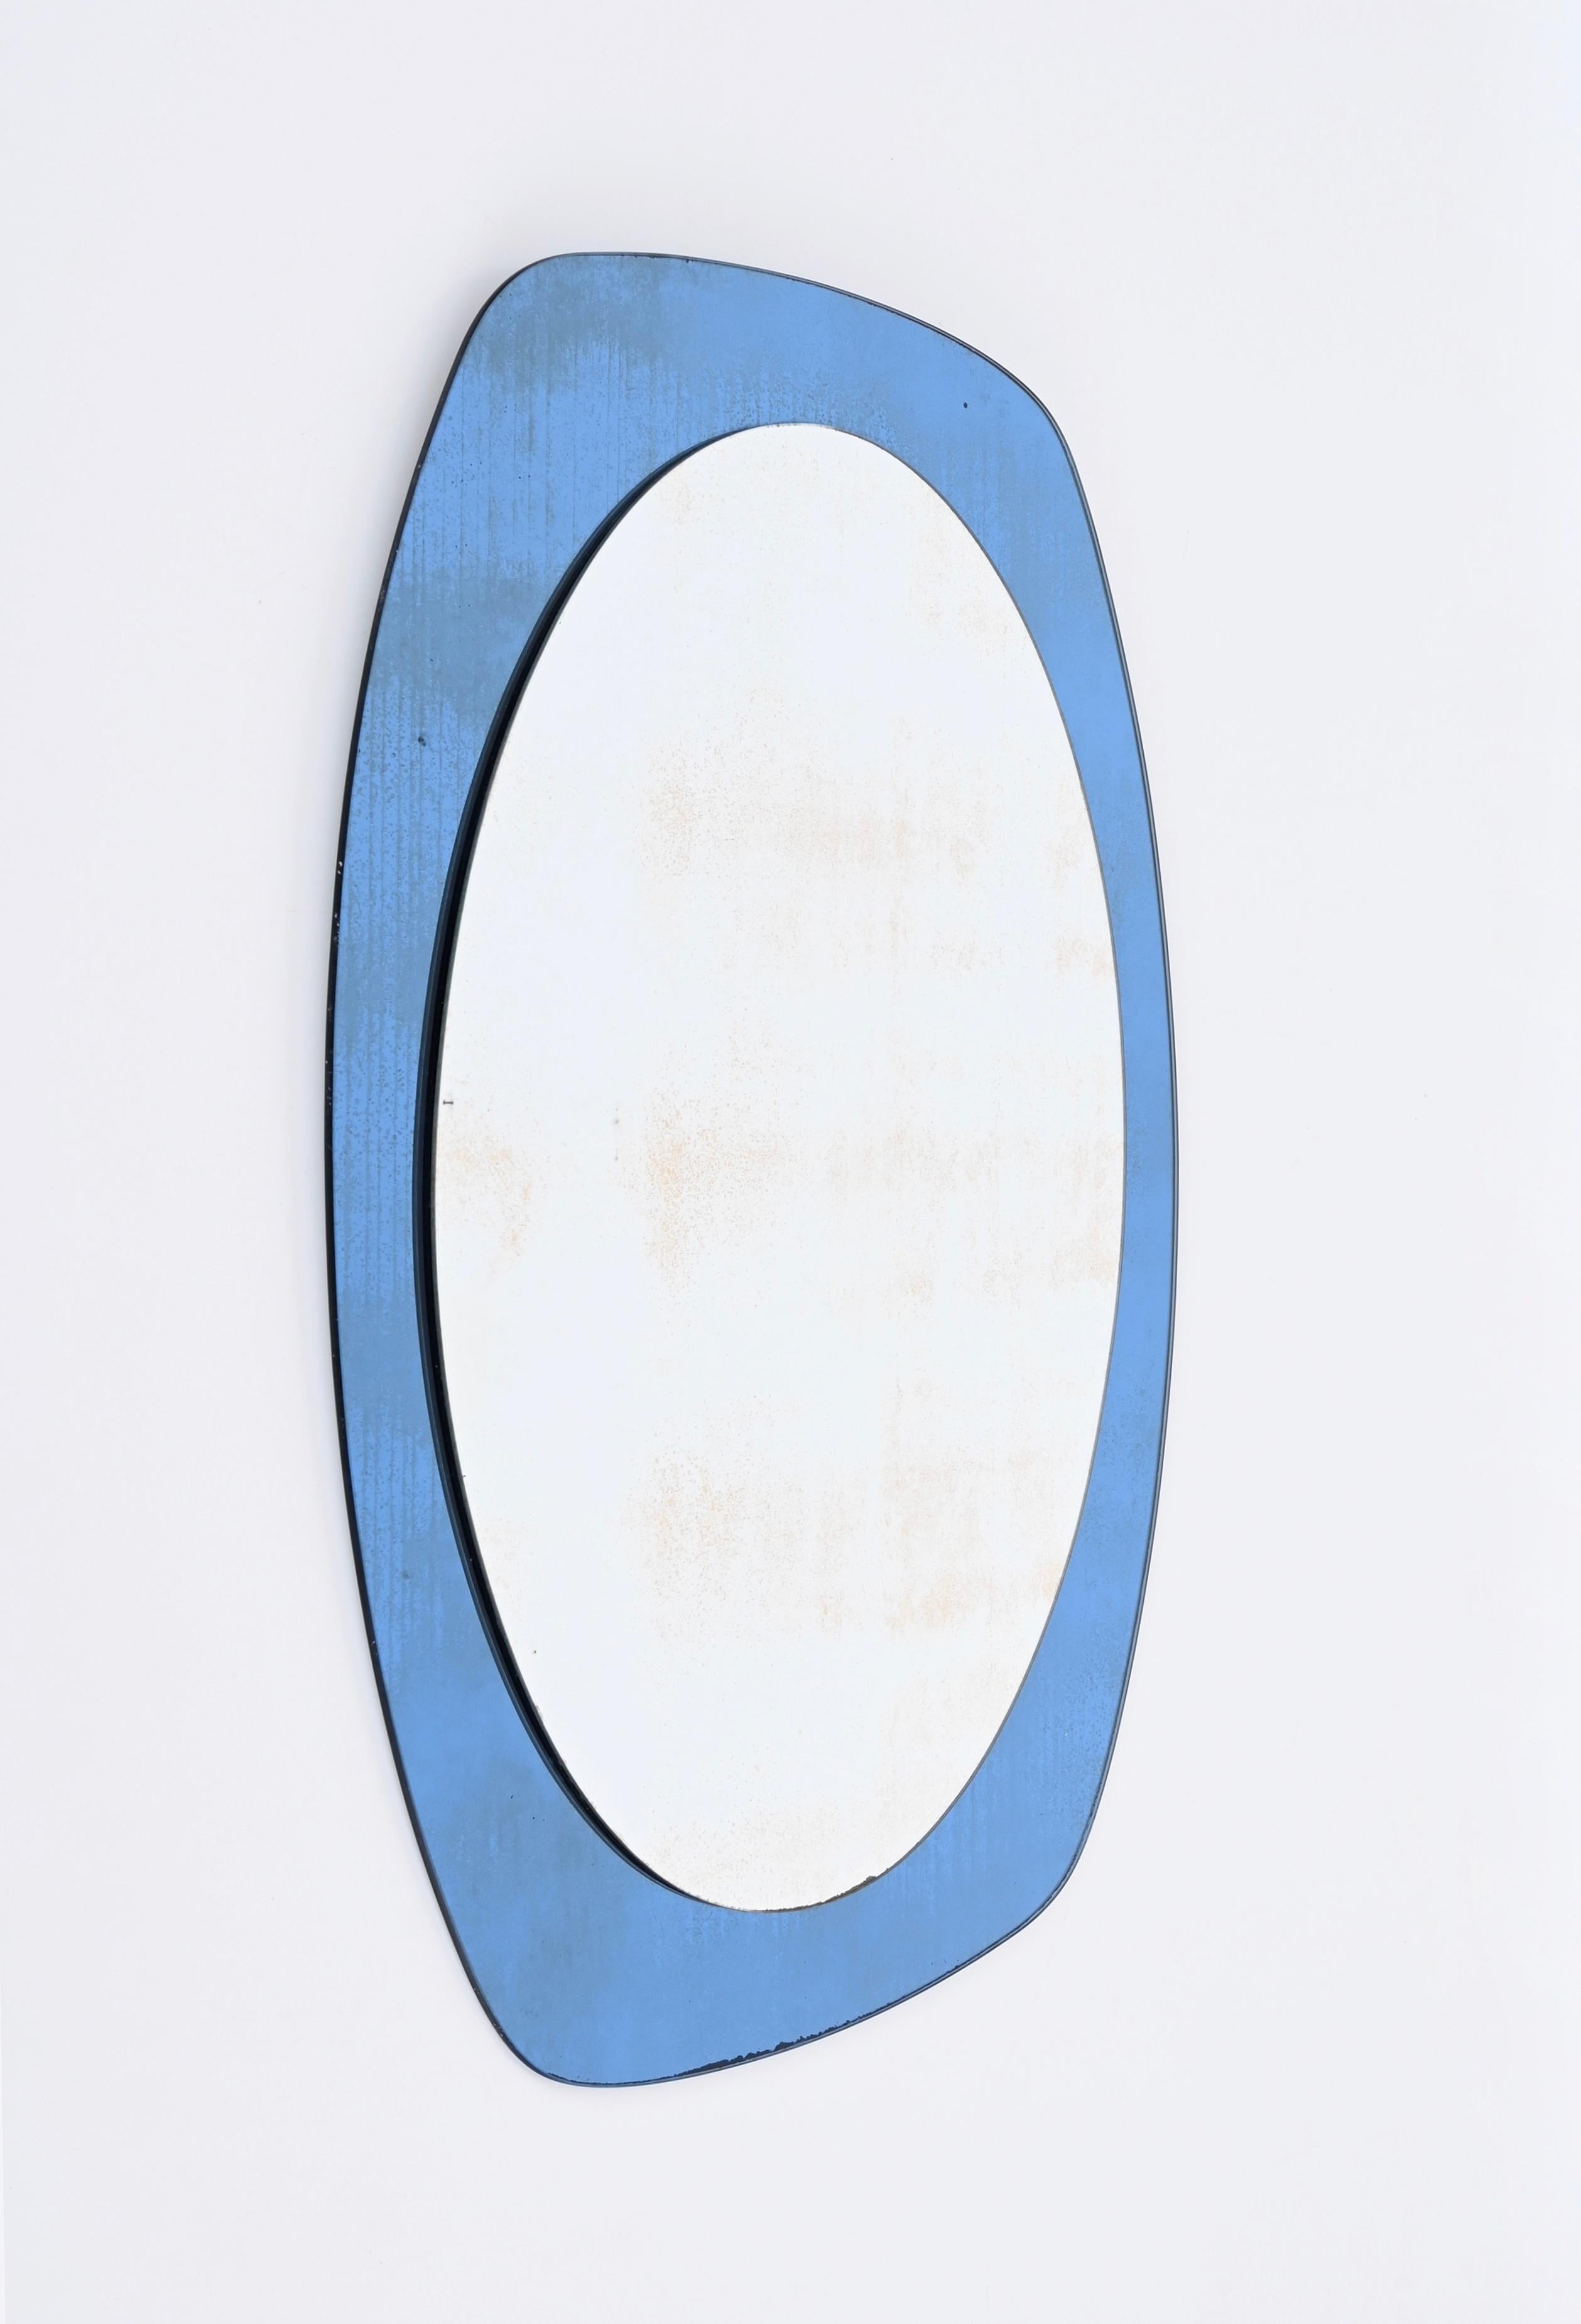 Mid-Century Modern Mid-Century Cristal Art Oval Wall Mirror with Blue Glass Frame, Italy 1960s For Sale